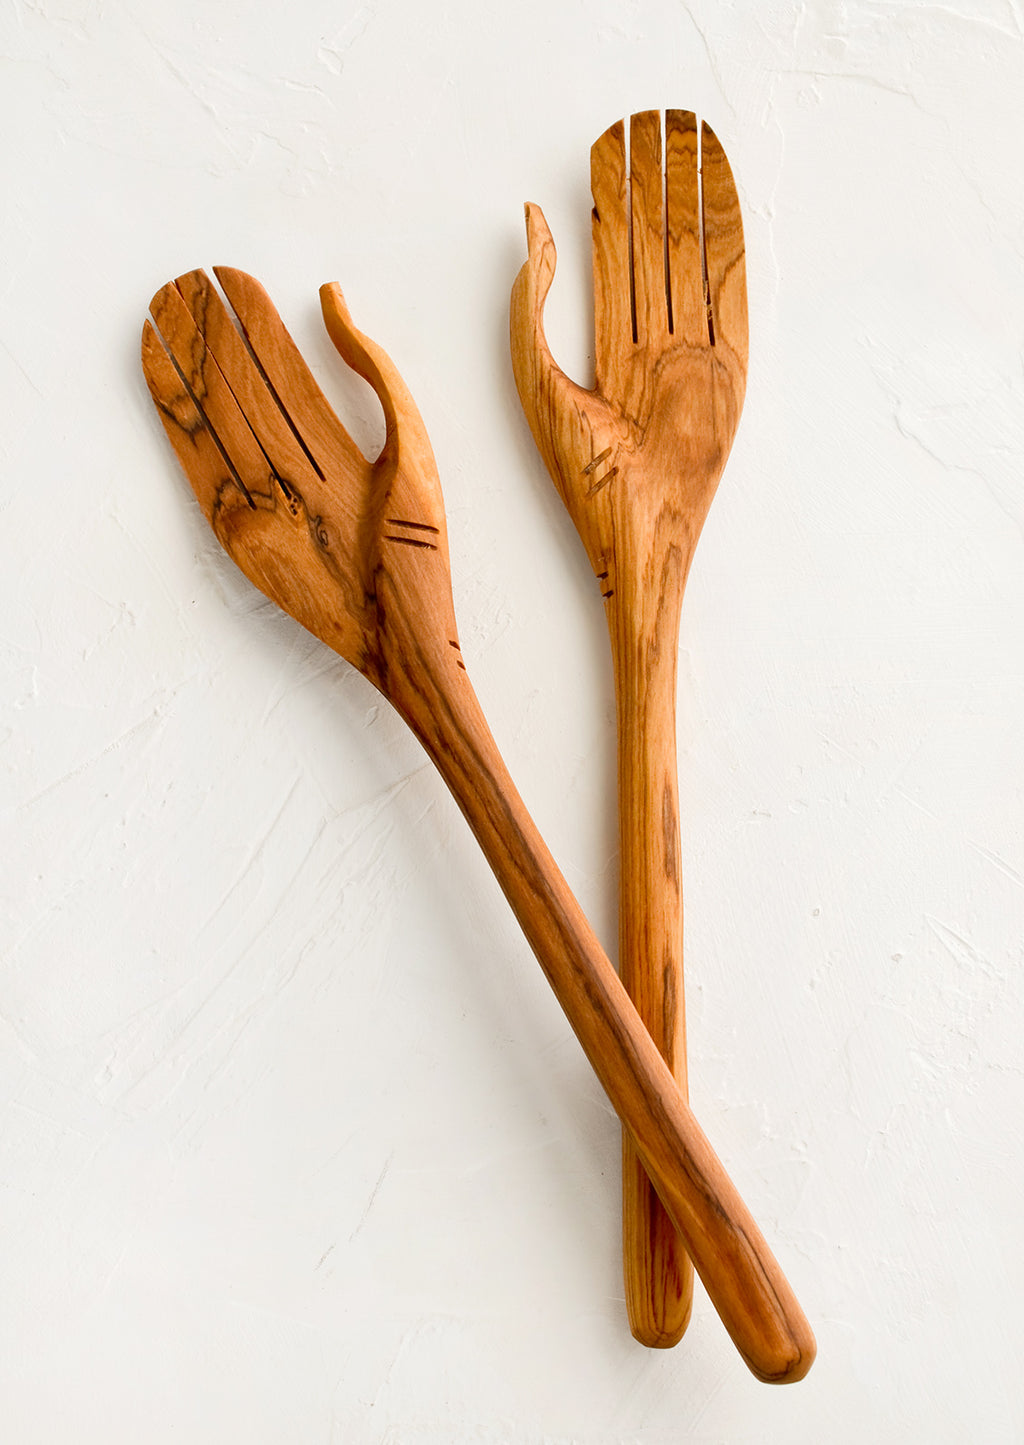 2: A pair of wooden salad servers carved in the shape of a pair of hands.